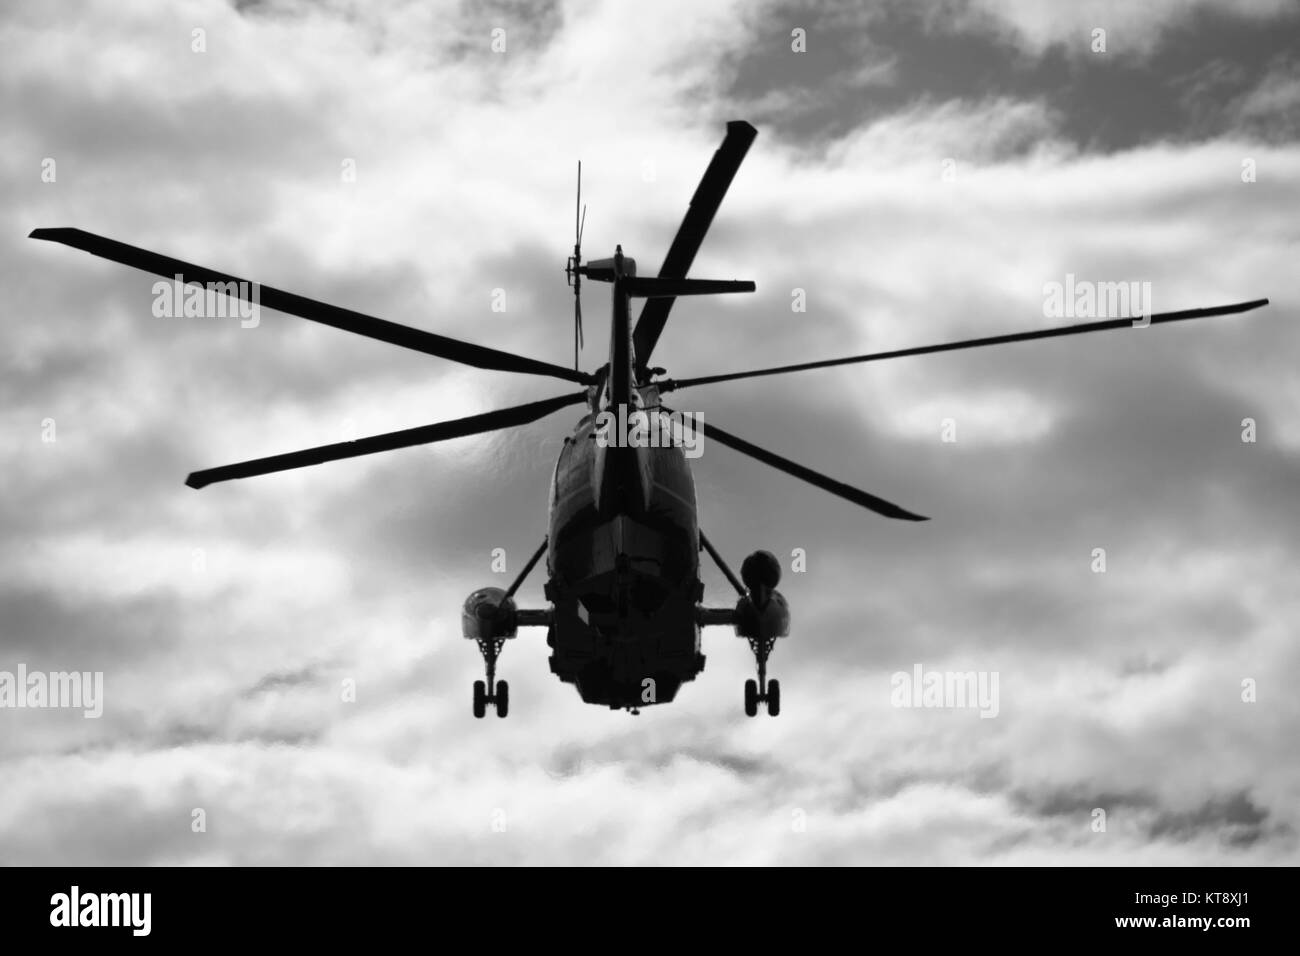 Washington, USA. 22nd Dec, 2017. Marine One carrying President Donald Trump departs the White House for Palm Beach, FL where he will be spending the Christmas holiday, Friday, December 22, 2017. Credit: Michael Candelori/Alamy Live News Stock Photo